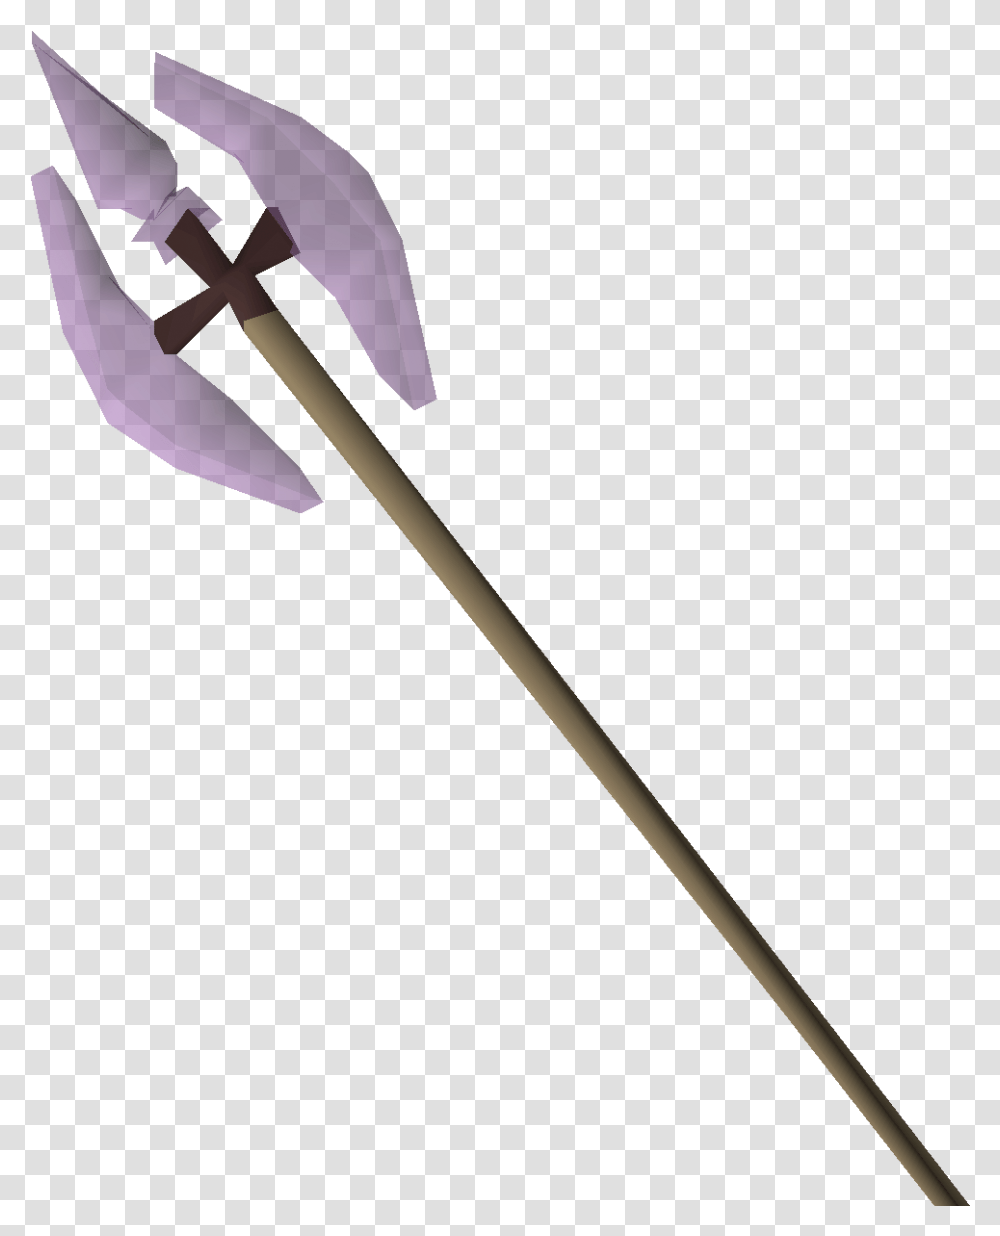 Corrupted Halberd Sword, Weapon, Weaponry, Spear, Symbol Transparent Png